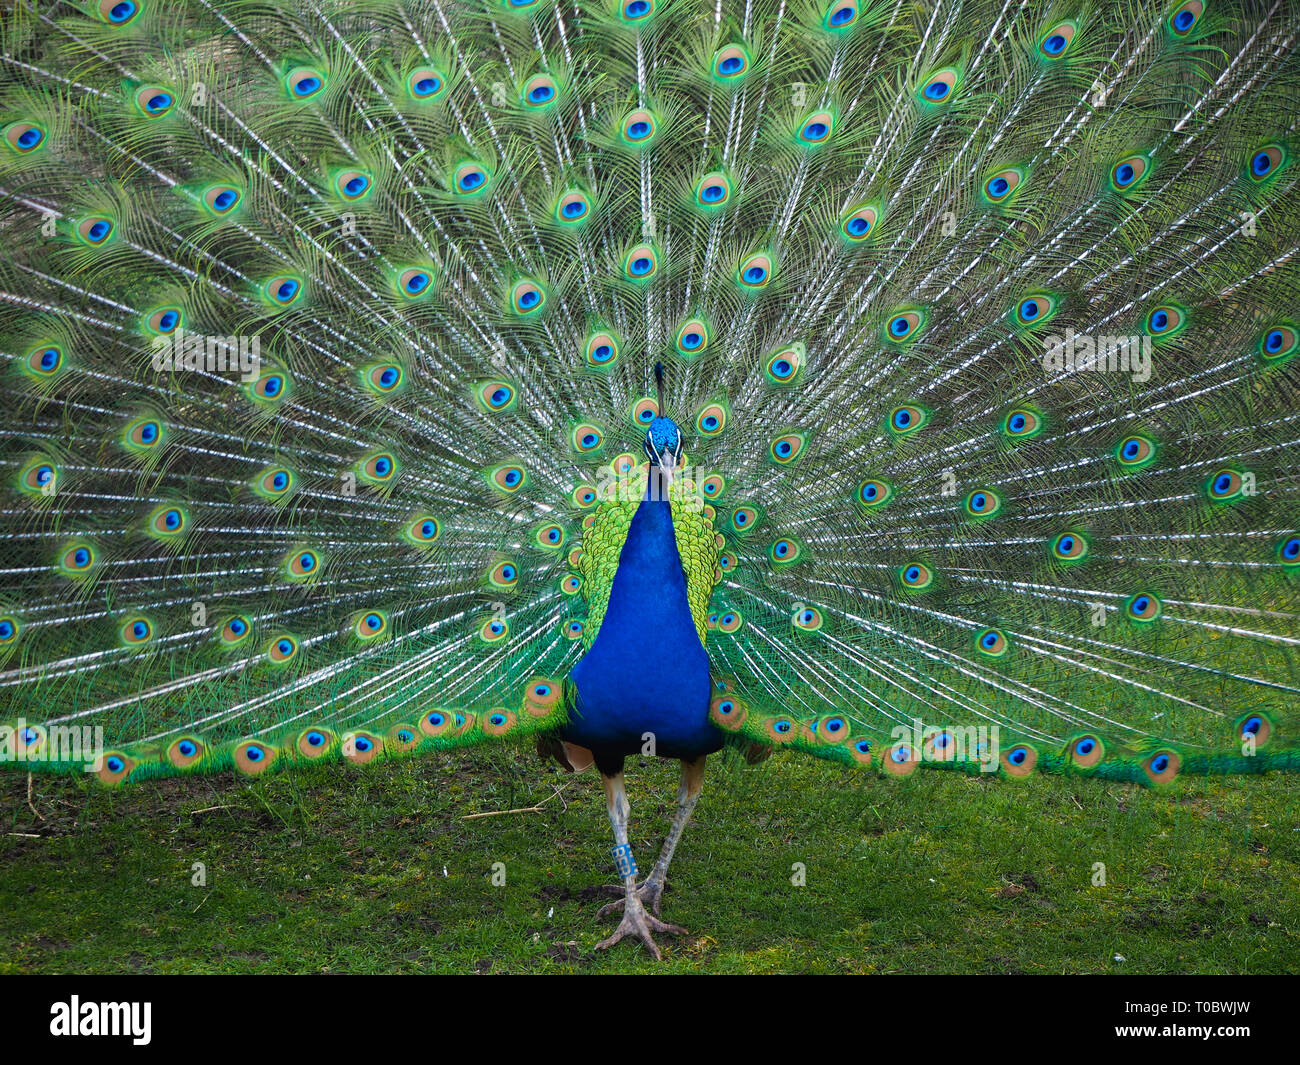 Male peacock displaying its tail feathers in spring Stock Photo